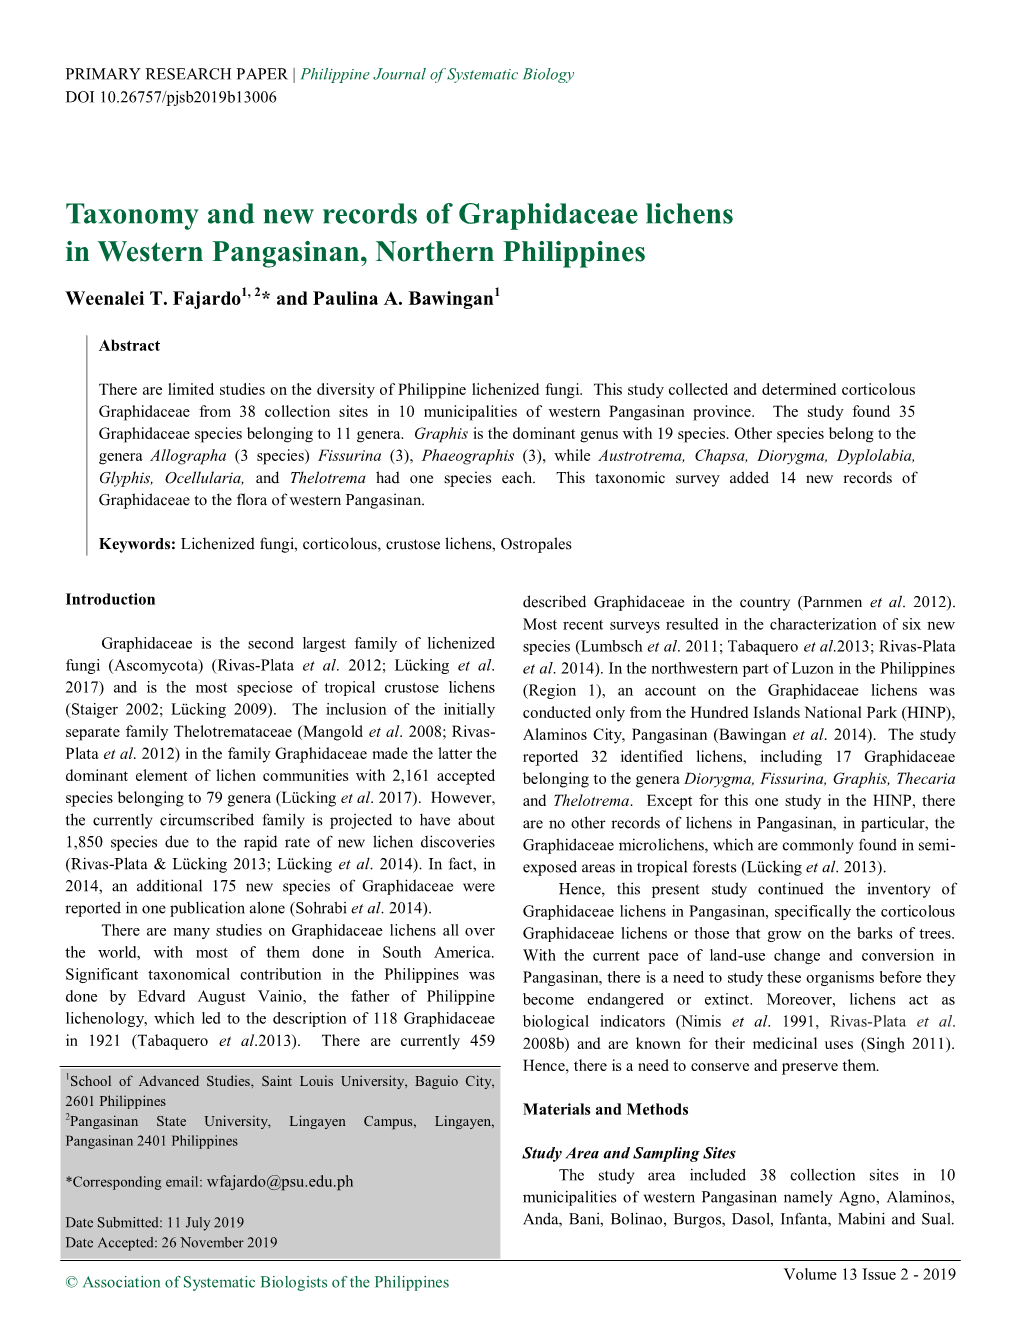 Taxonomy and New Records of Graphidaceae Lichens in Western Pangasinan, Northern Philippines